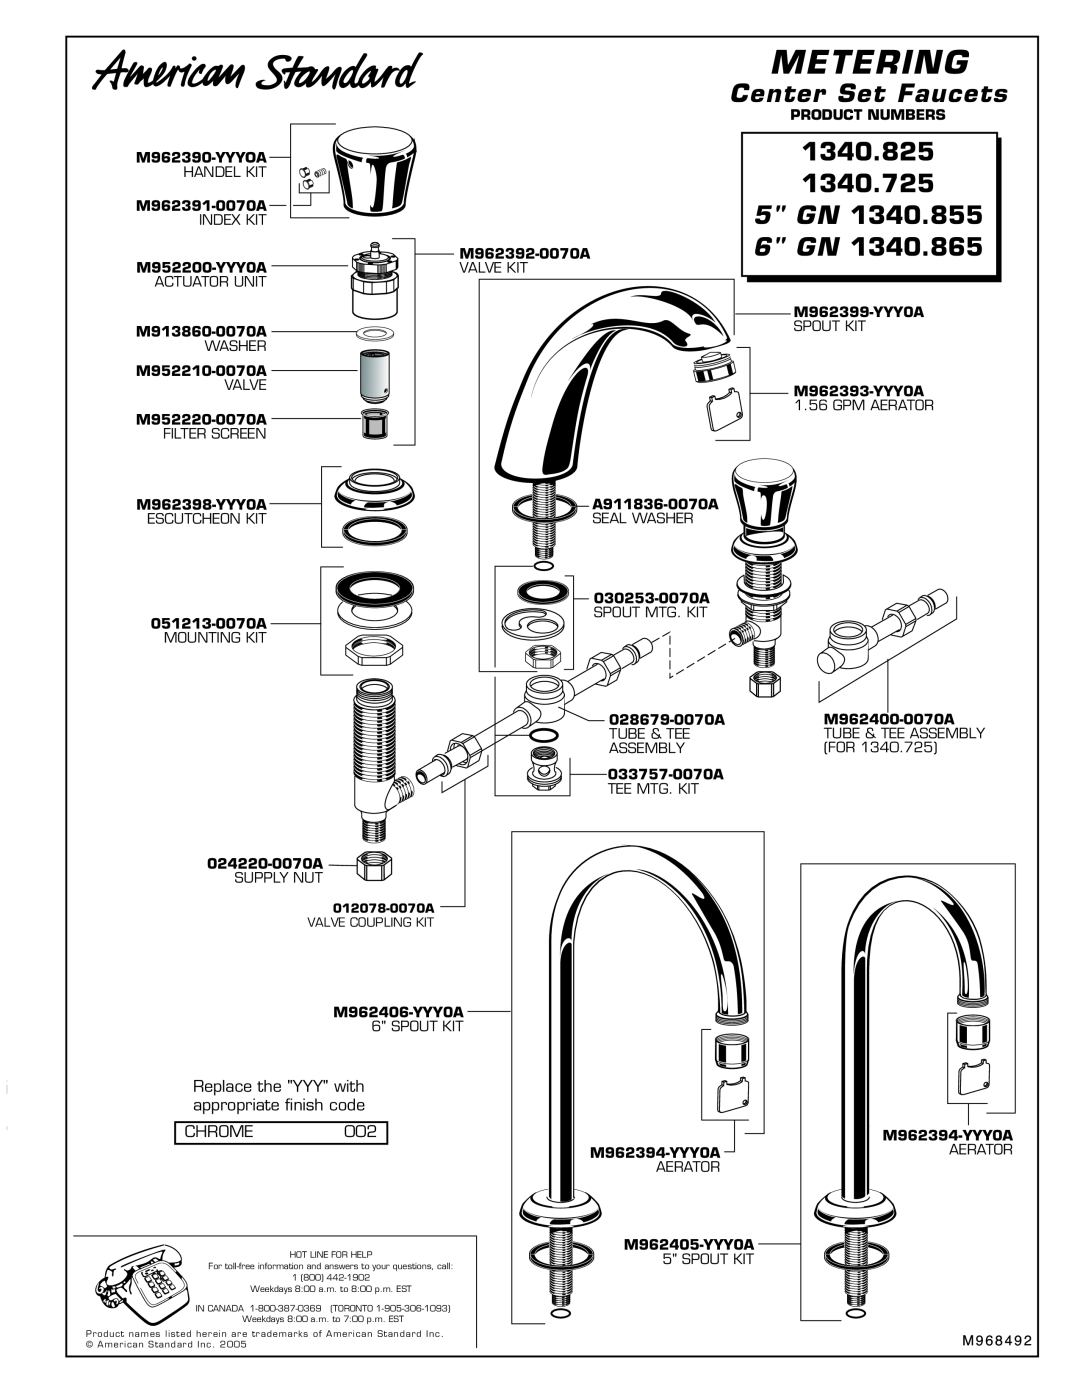 American Standard 1340.865 Center Set Faucets, 1340.825 1340.725 5 GN 1340.855 6 GN, Metering, CHROME002 